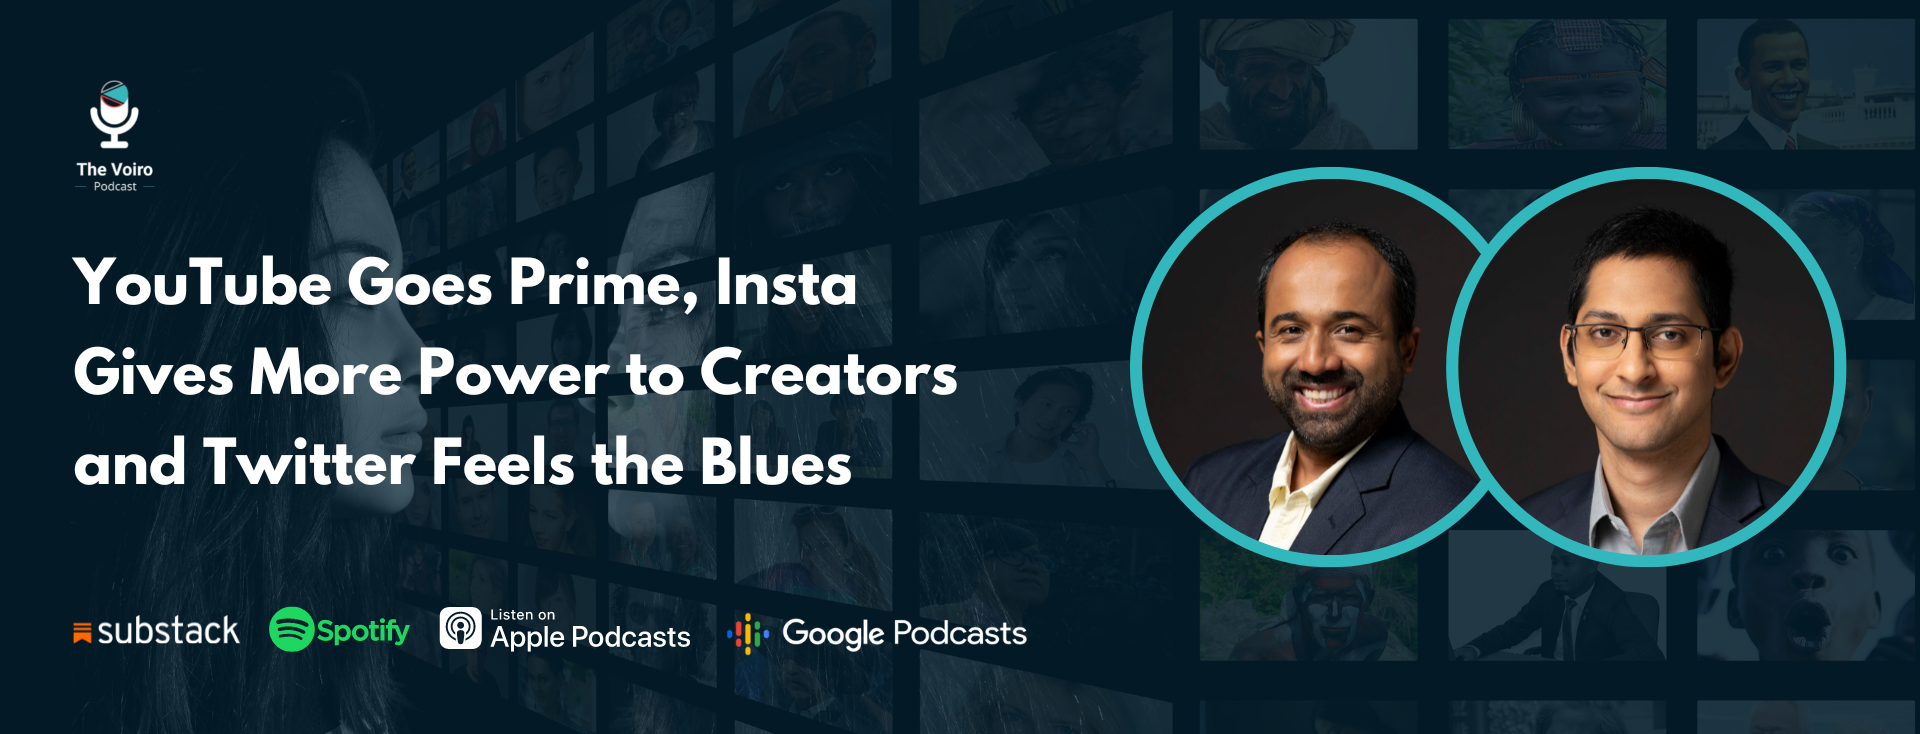 YouTube Goes Prime, Insta Gives More Power to Creators and Twitter Feels the Blues - The Voiro Podcast